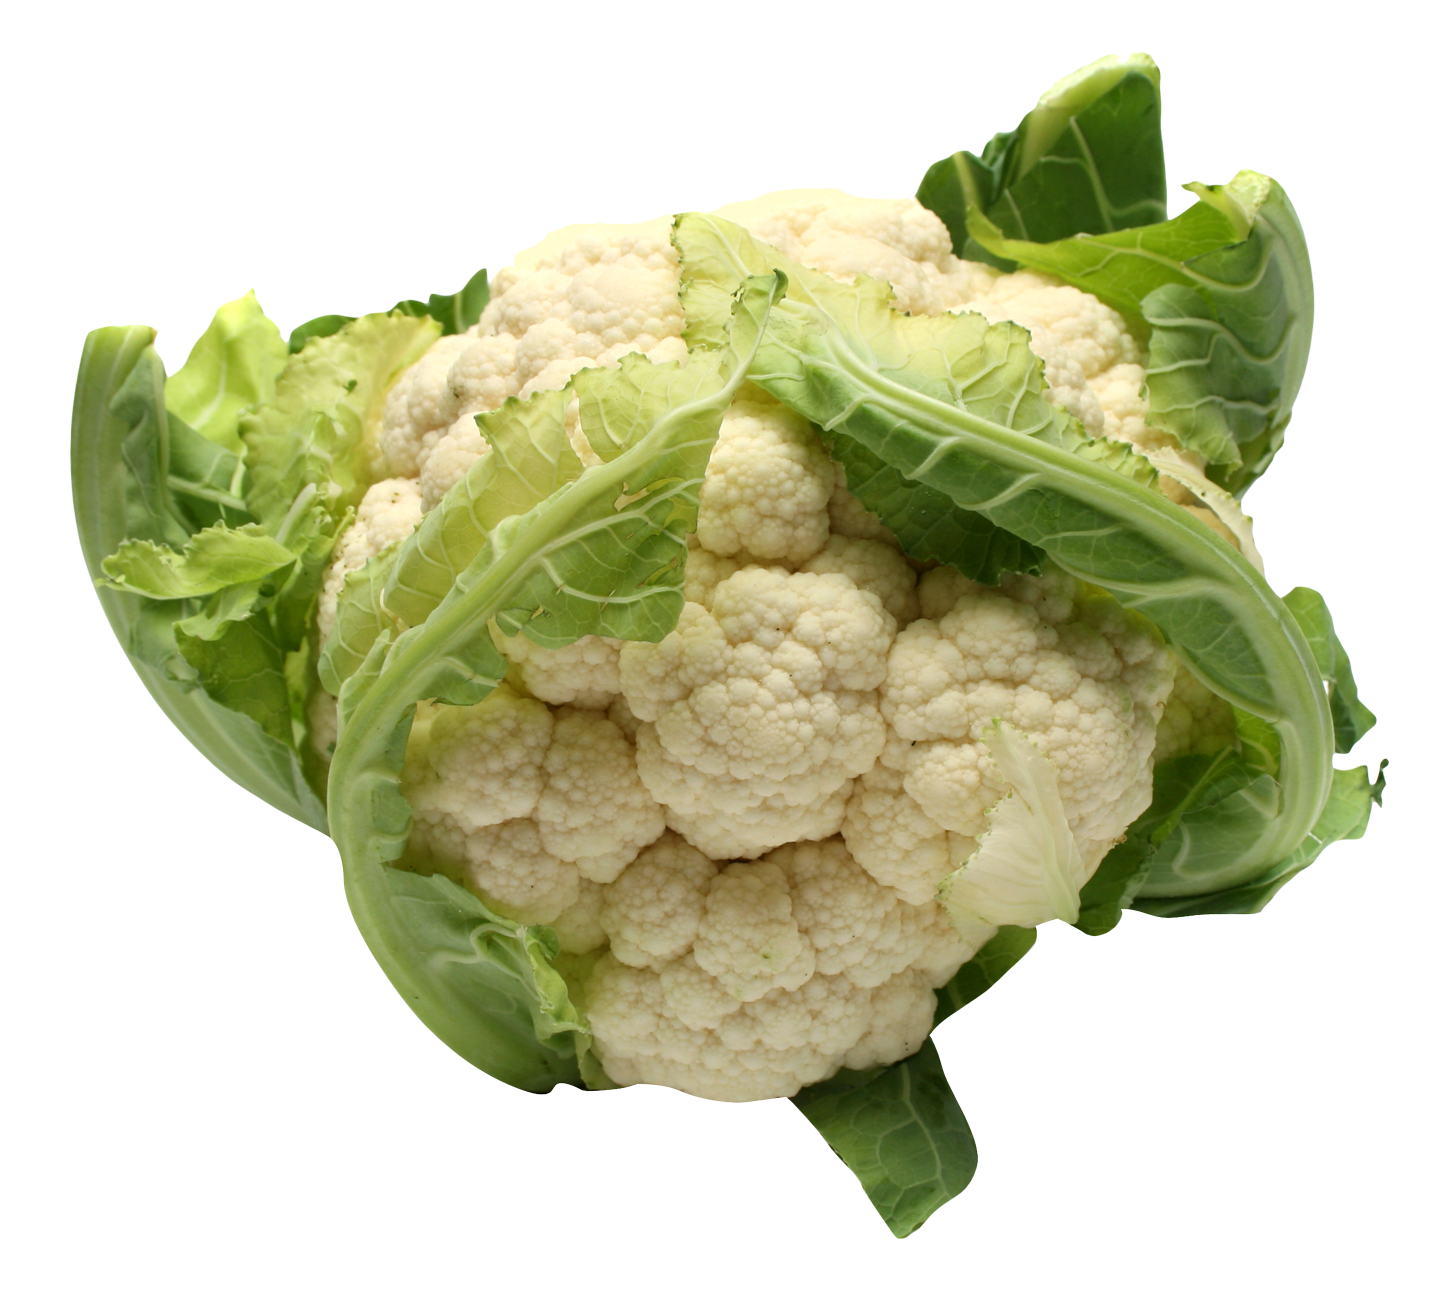 Free png images download. Vegetables clipart cabbage